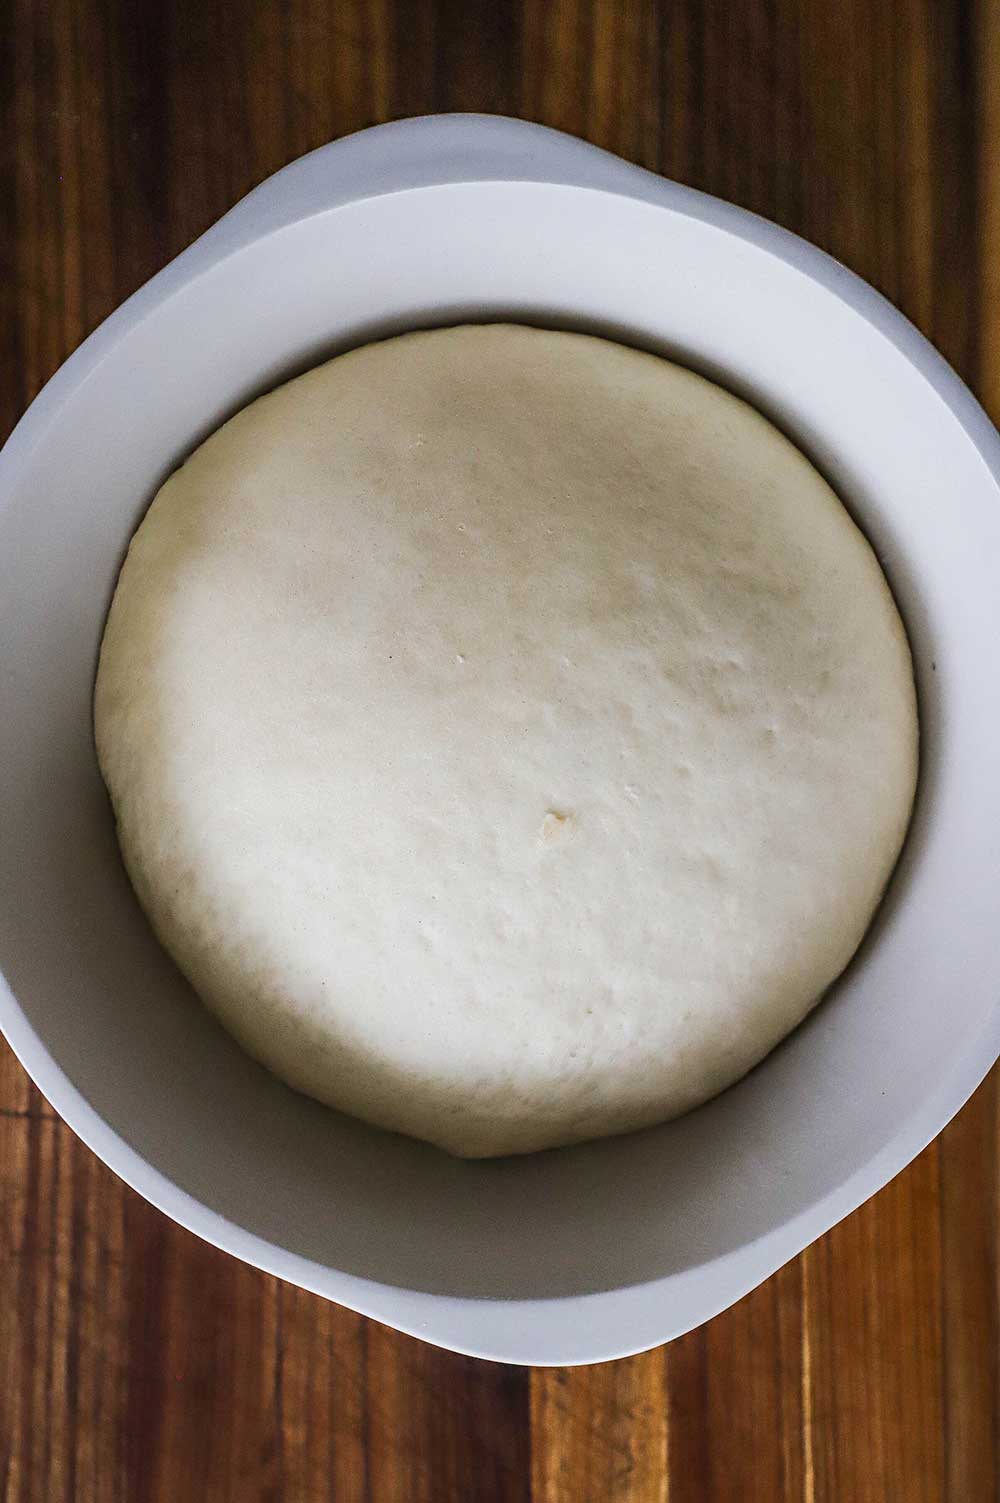 A large ceramic bowl filled with risen bread dough.